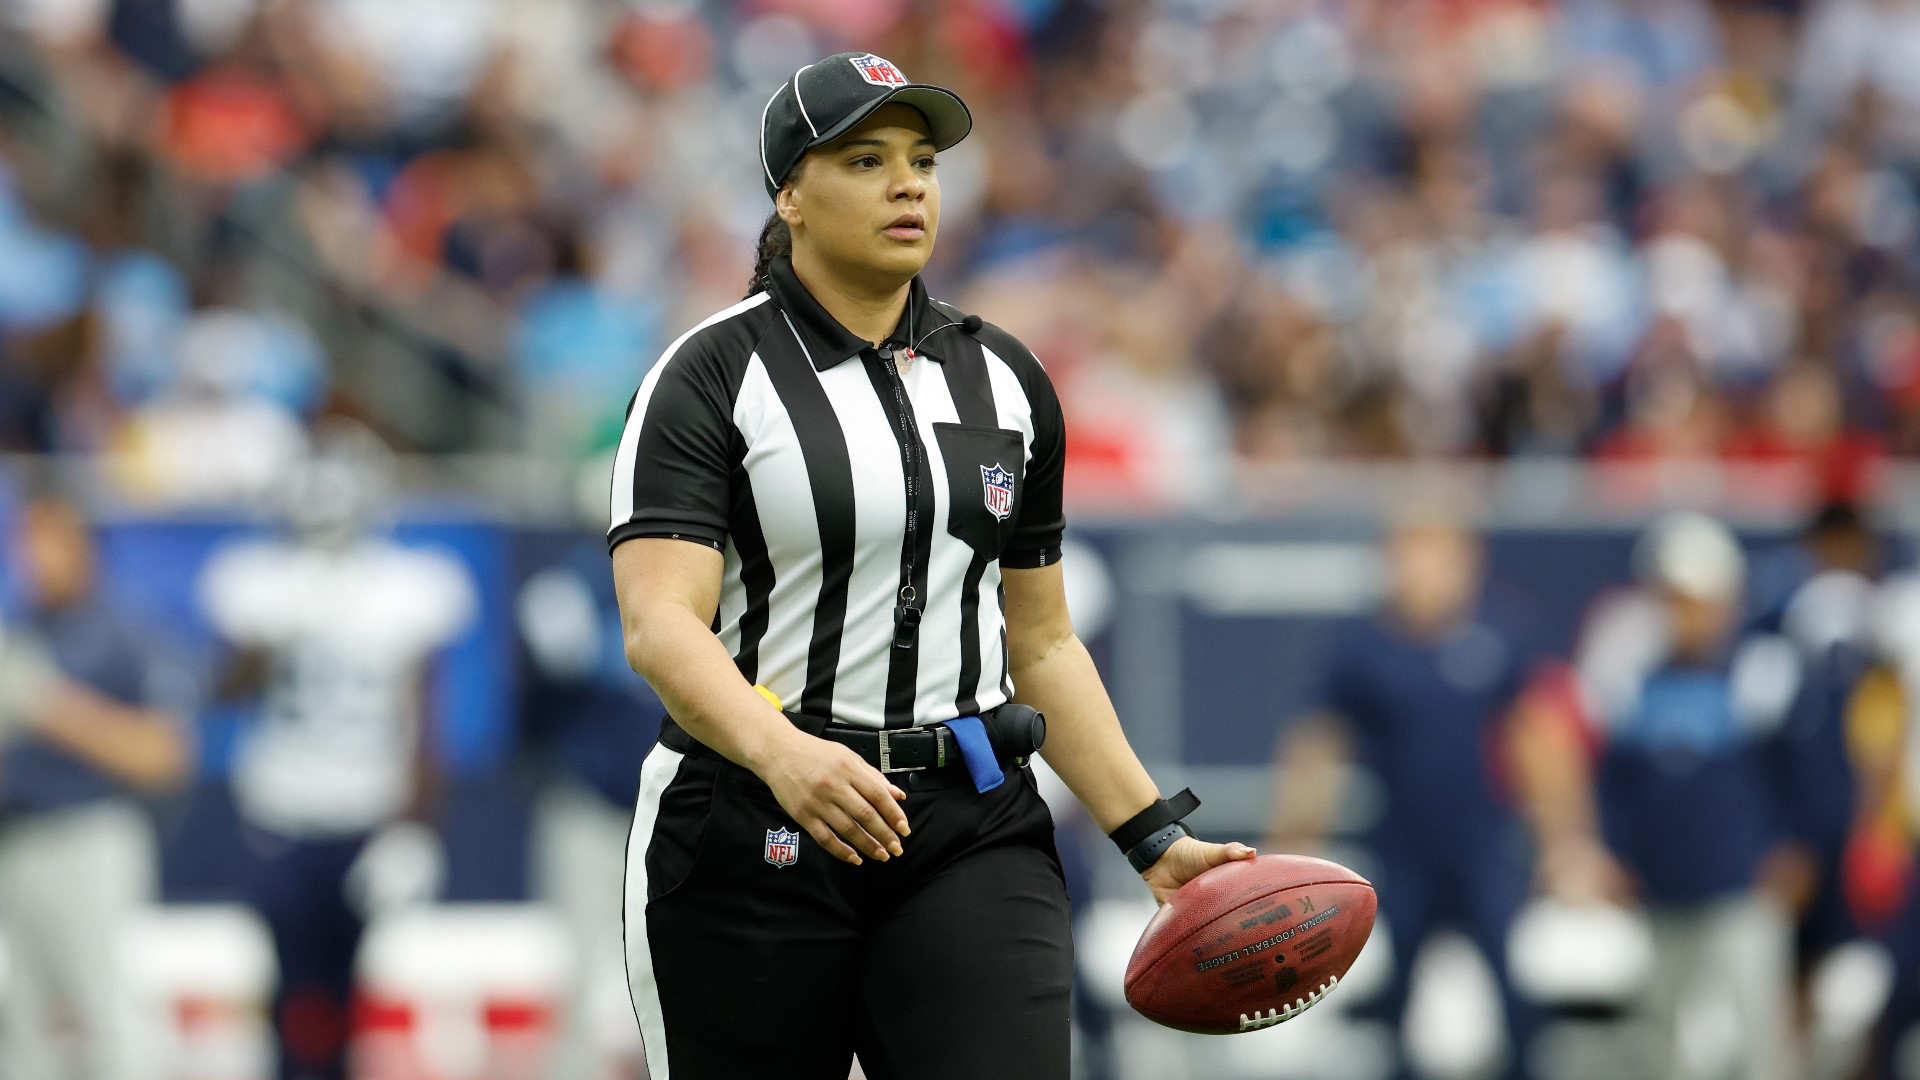 Maia Chaka spent Saturday afternoon in Niagara Falls talking about life and sports. She is the first Black woman hired by the NFL as an on-field official.